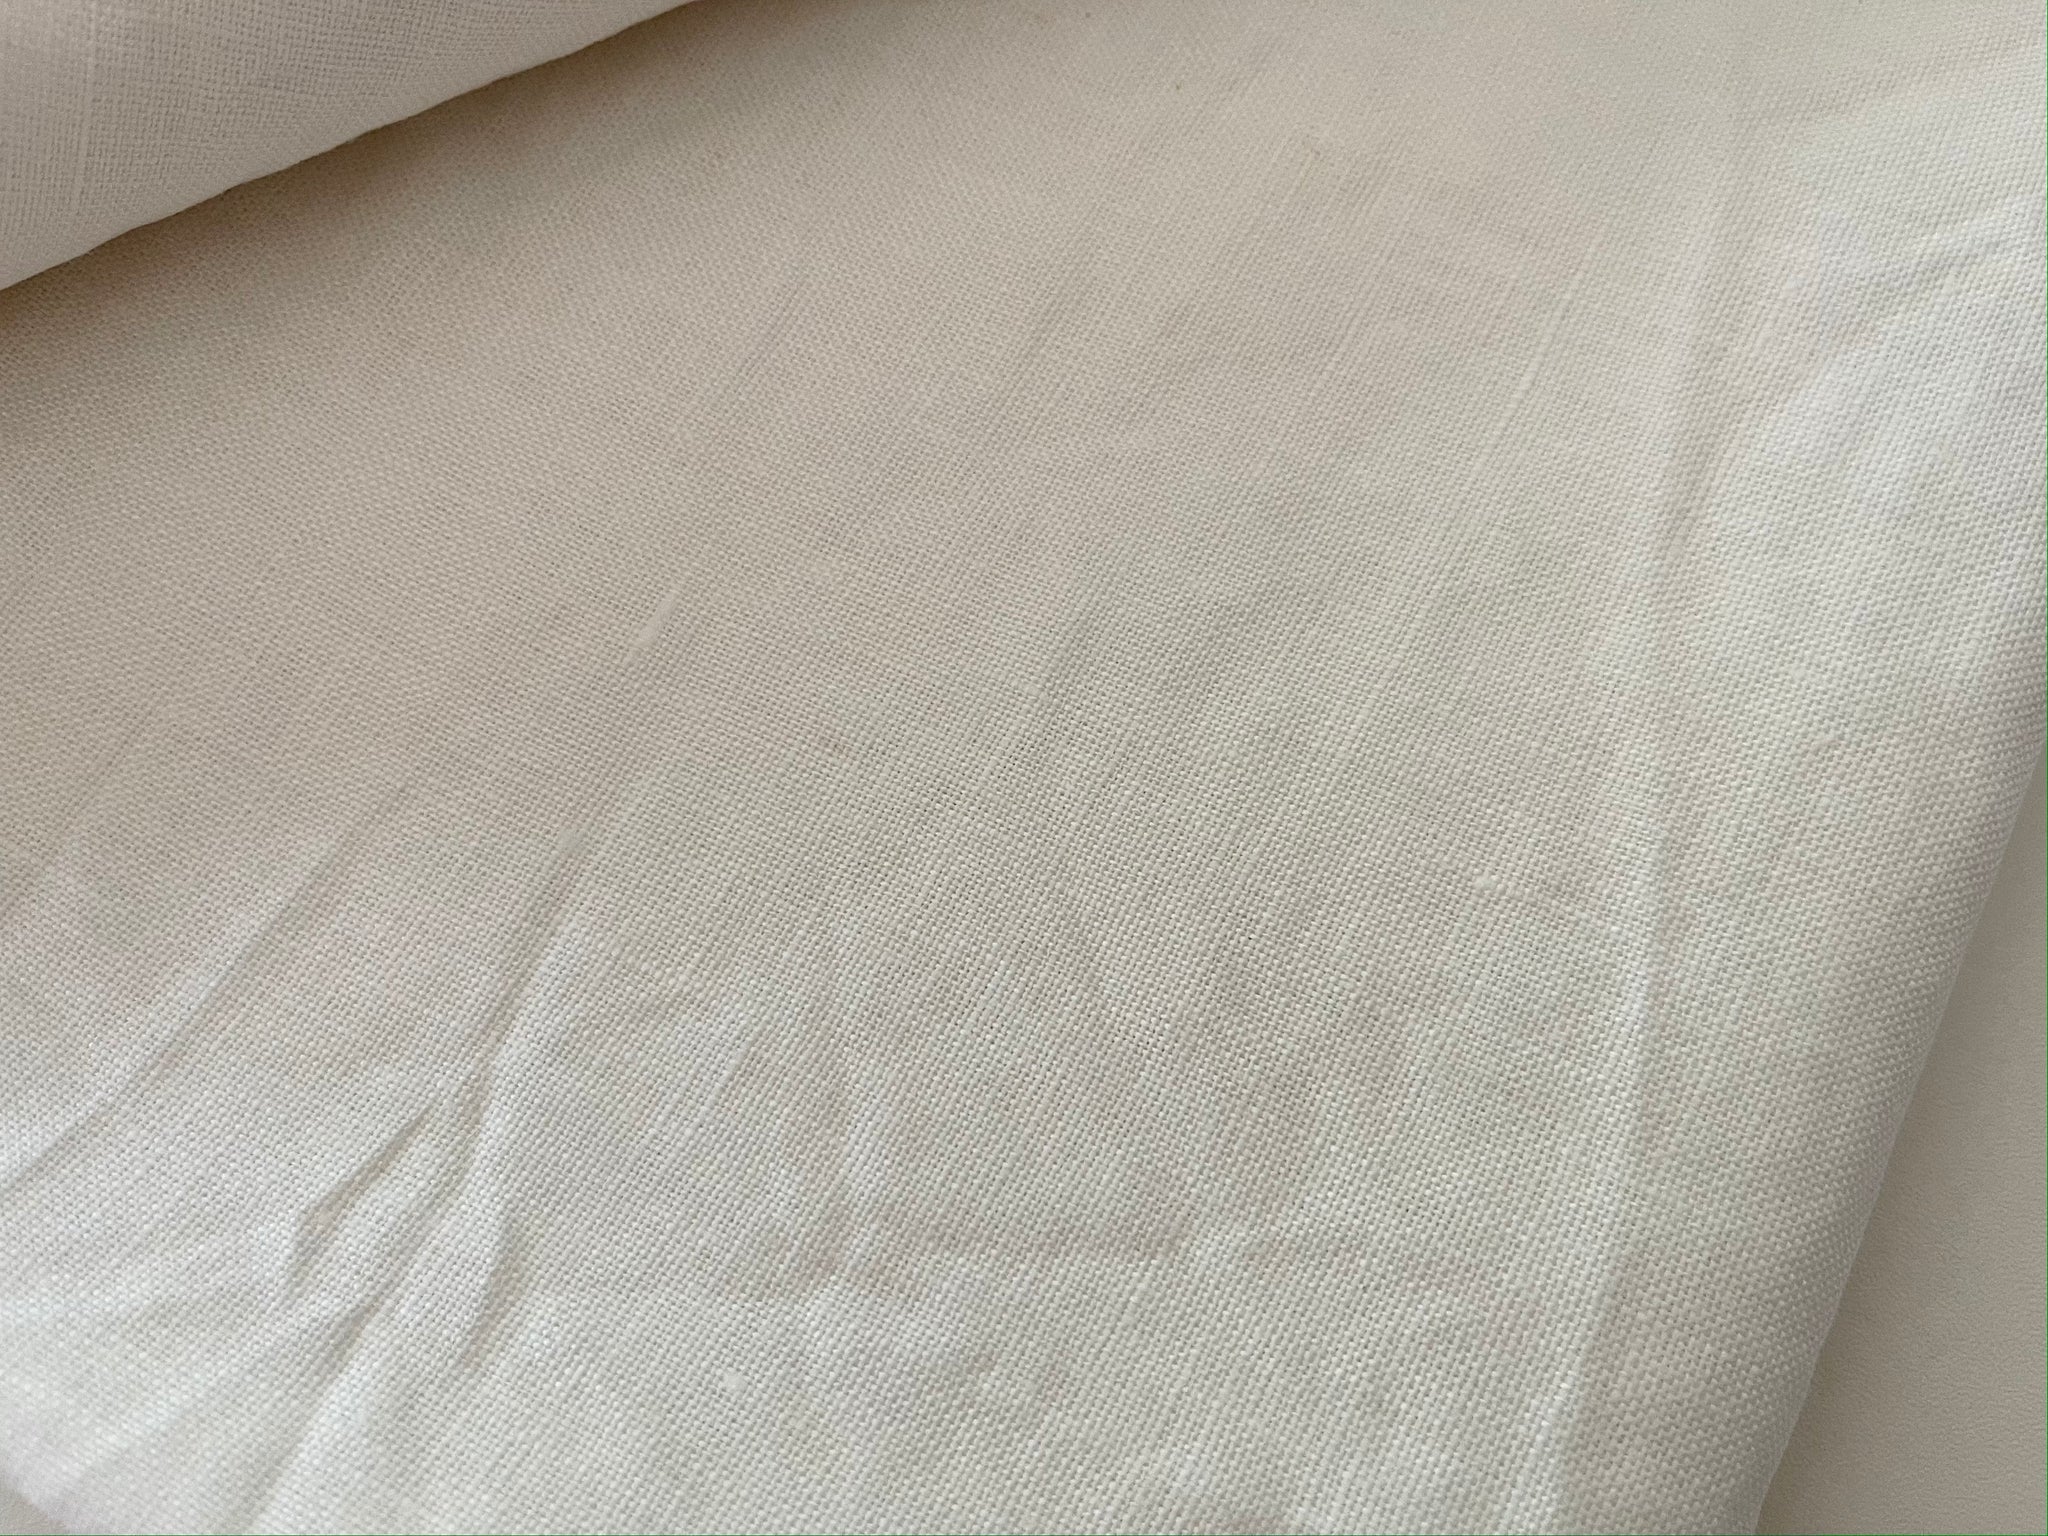 Linen Fabric Remnants - Off-White Unfinished - 2 yards